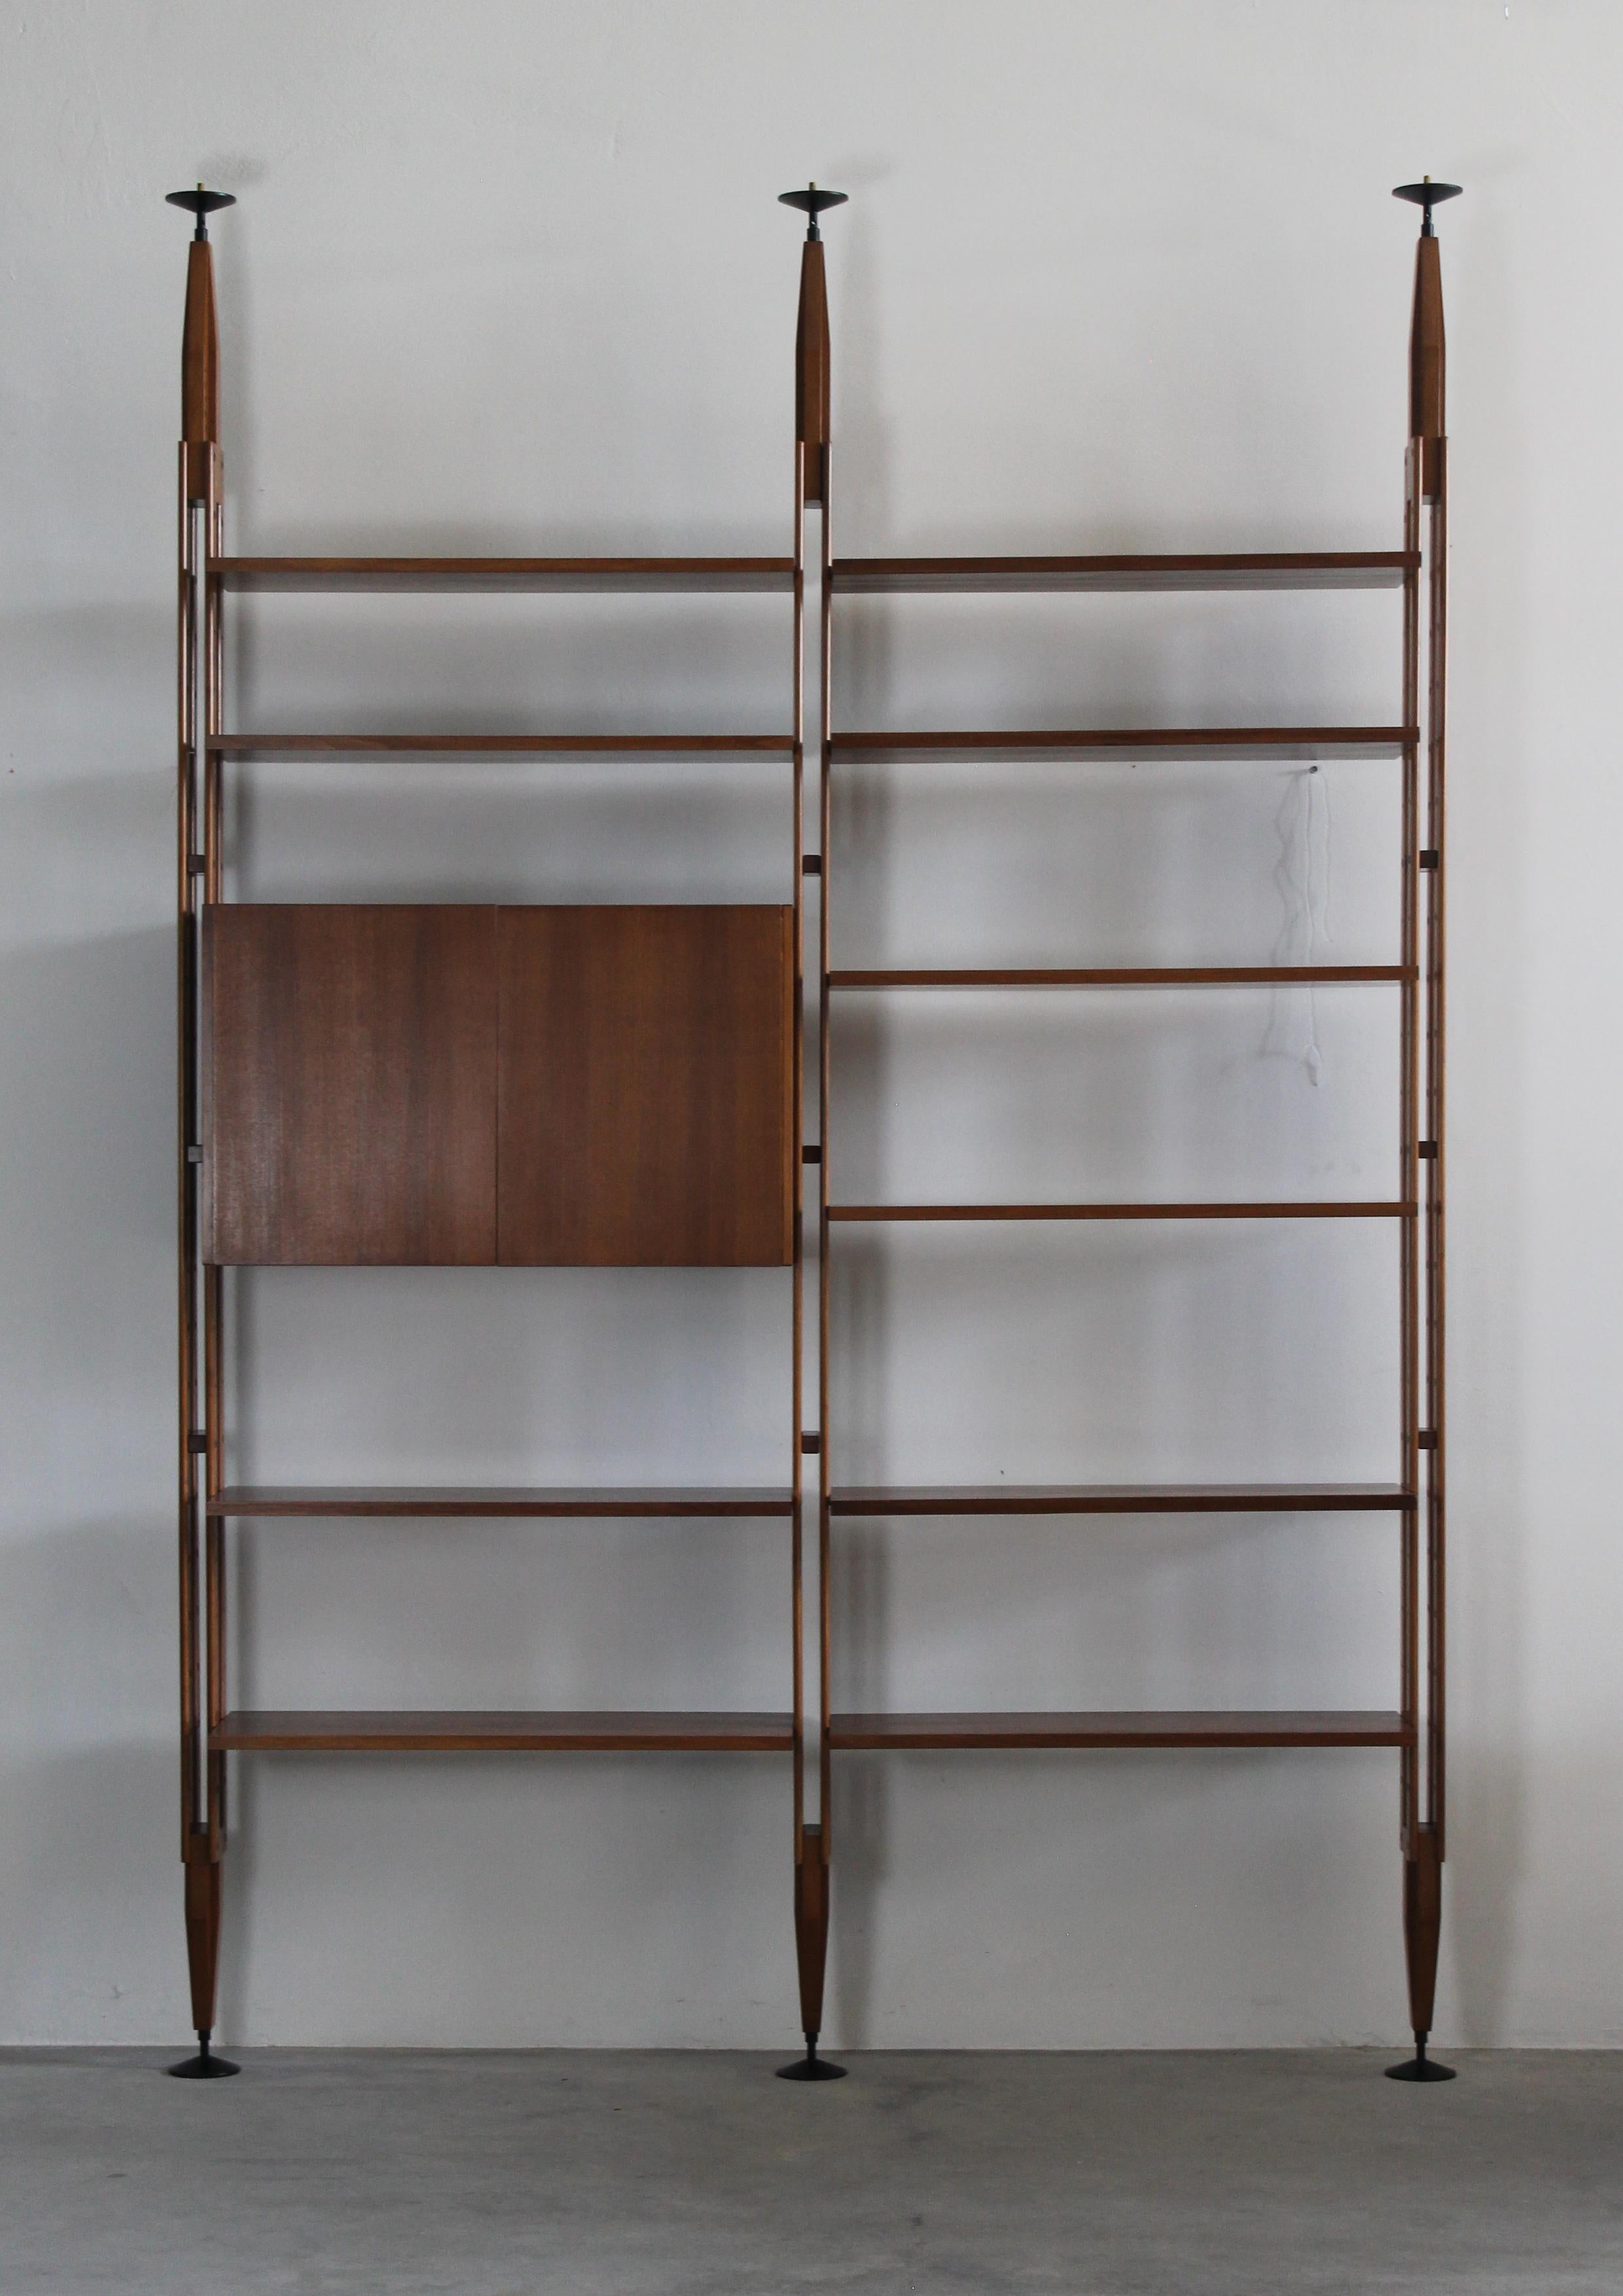 LB7 modular bookcase composed of two modules with one storage unit and shelves, the bookcase is realized in solid veneered teak wood, and black lacquered metal details. 

Designed by Franco Albini and produced by Poggi Pavia, 1956, Italy.